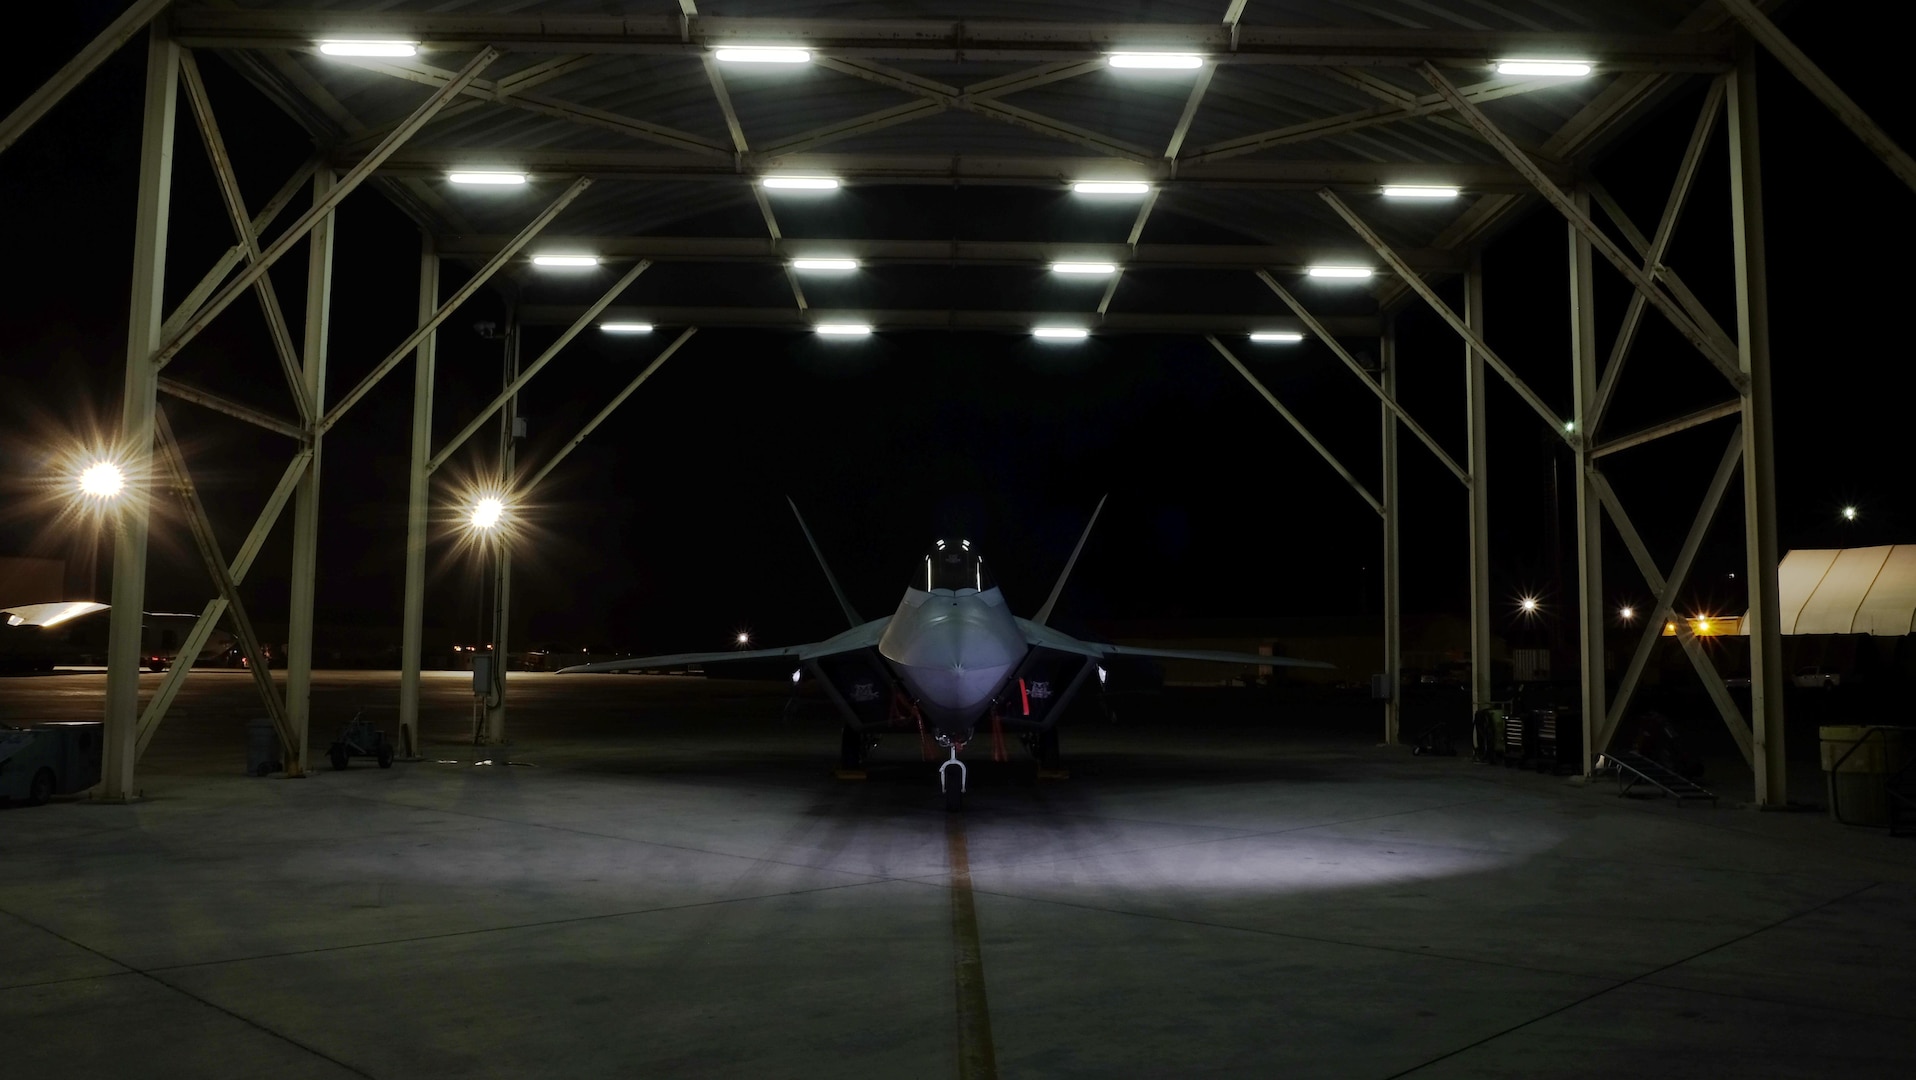 An F-22A Raptor with the 27th Expeditionary Fighter Squadron rests on the flight line after flying in support of Combined Joint Task Force- Operation Inherent Resolve at an undisclosed location in Southwest Asia, May 3, 2017. The 27 EFS, currently deployed with the 380th Air Expeditionary Wing, will celebrate its centennial May 8, 2017. This squadron is one of the oldest and most famous fighter squadrons in American history and carries on its long legacy of airpower in the fight against ISIS. (U.S. Air Force photo by Staff Sgt. Marjorie A. Bowlden)